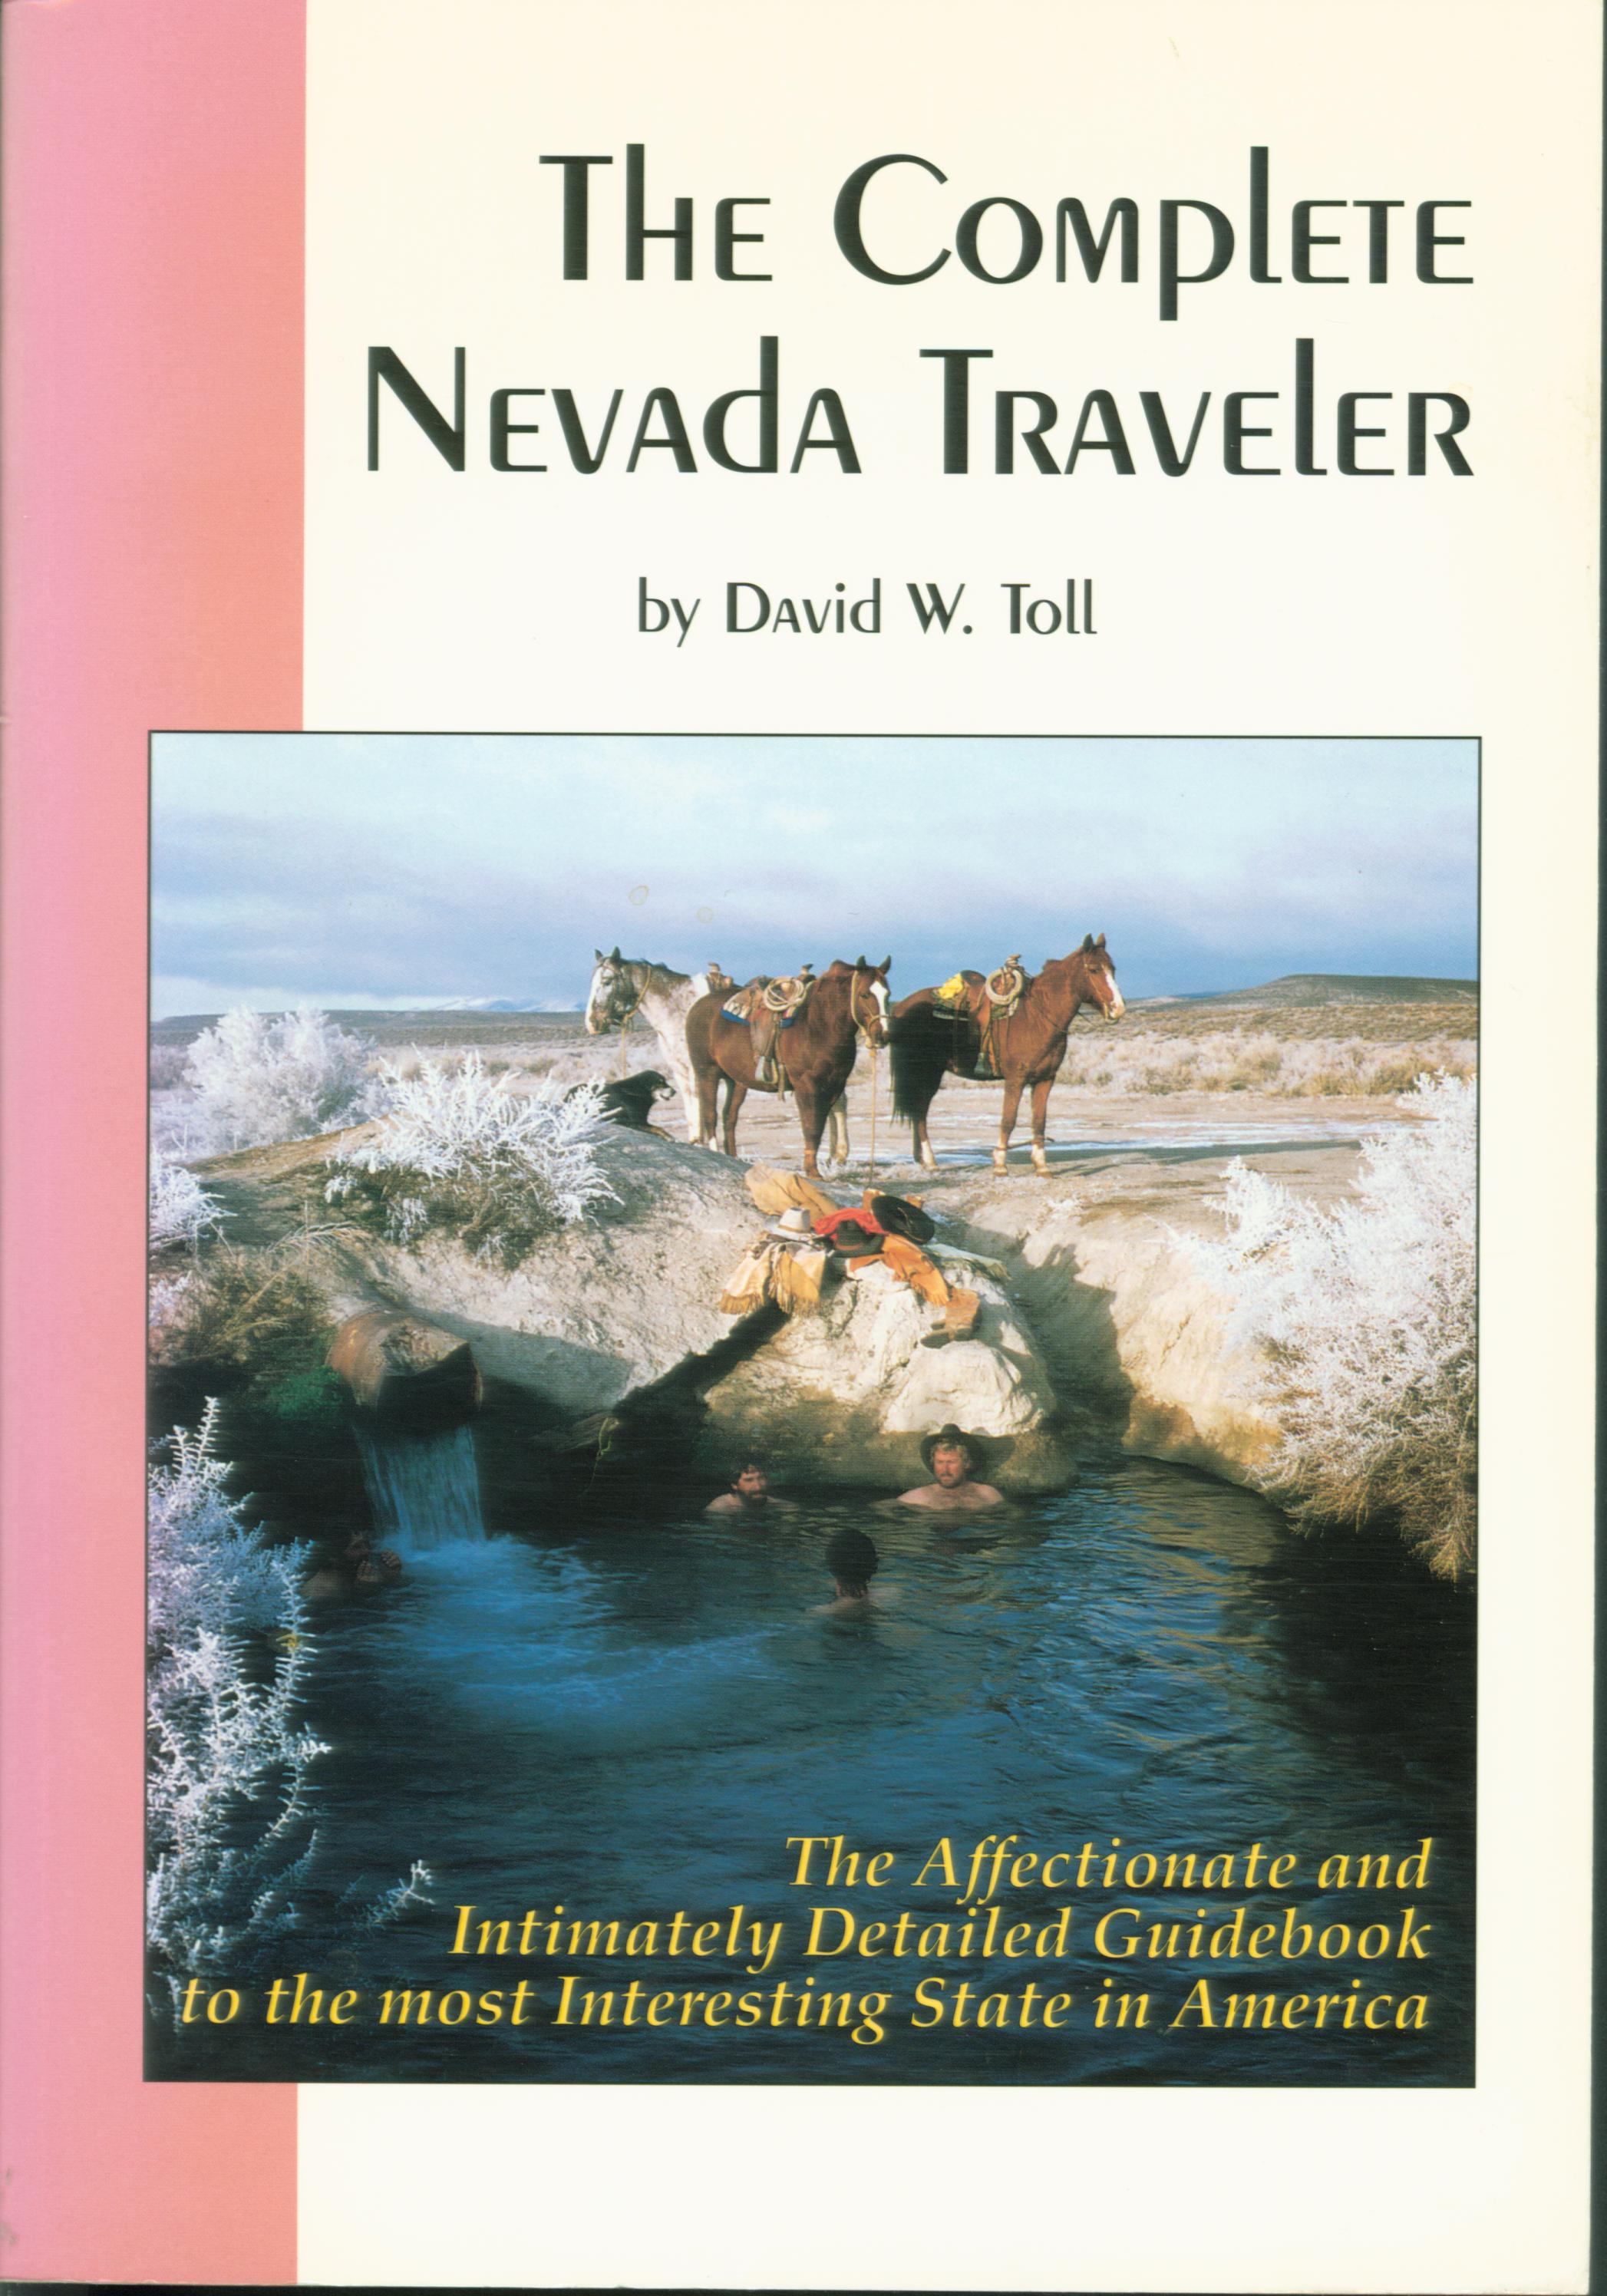 THE COMPLETE NEVADA TRAVELER: the affectionate and intimately detailed guidebook to the most interesting state in America.